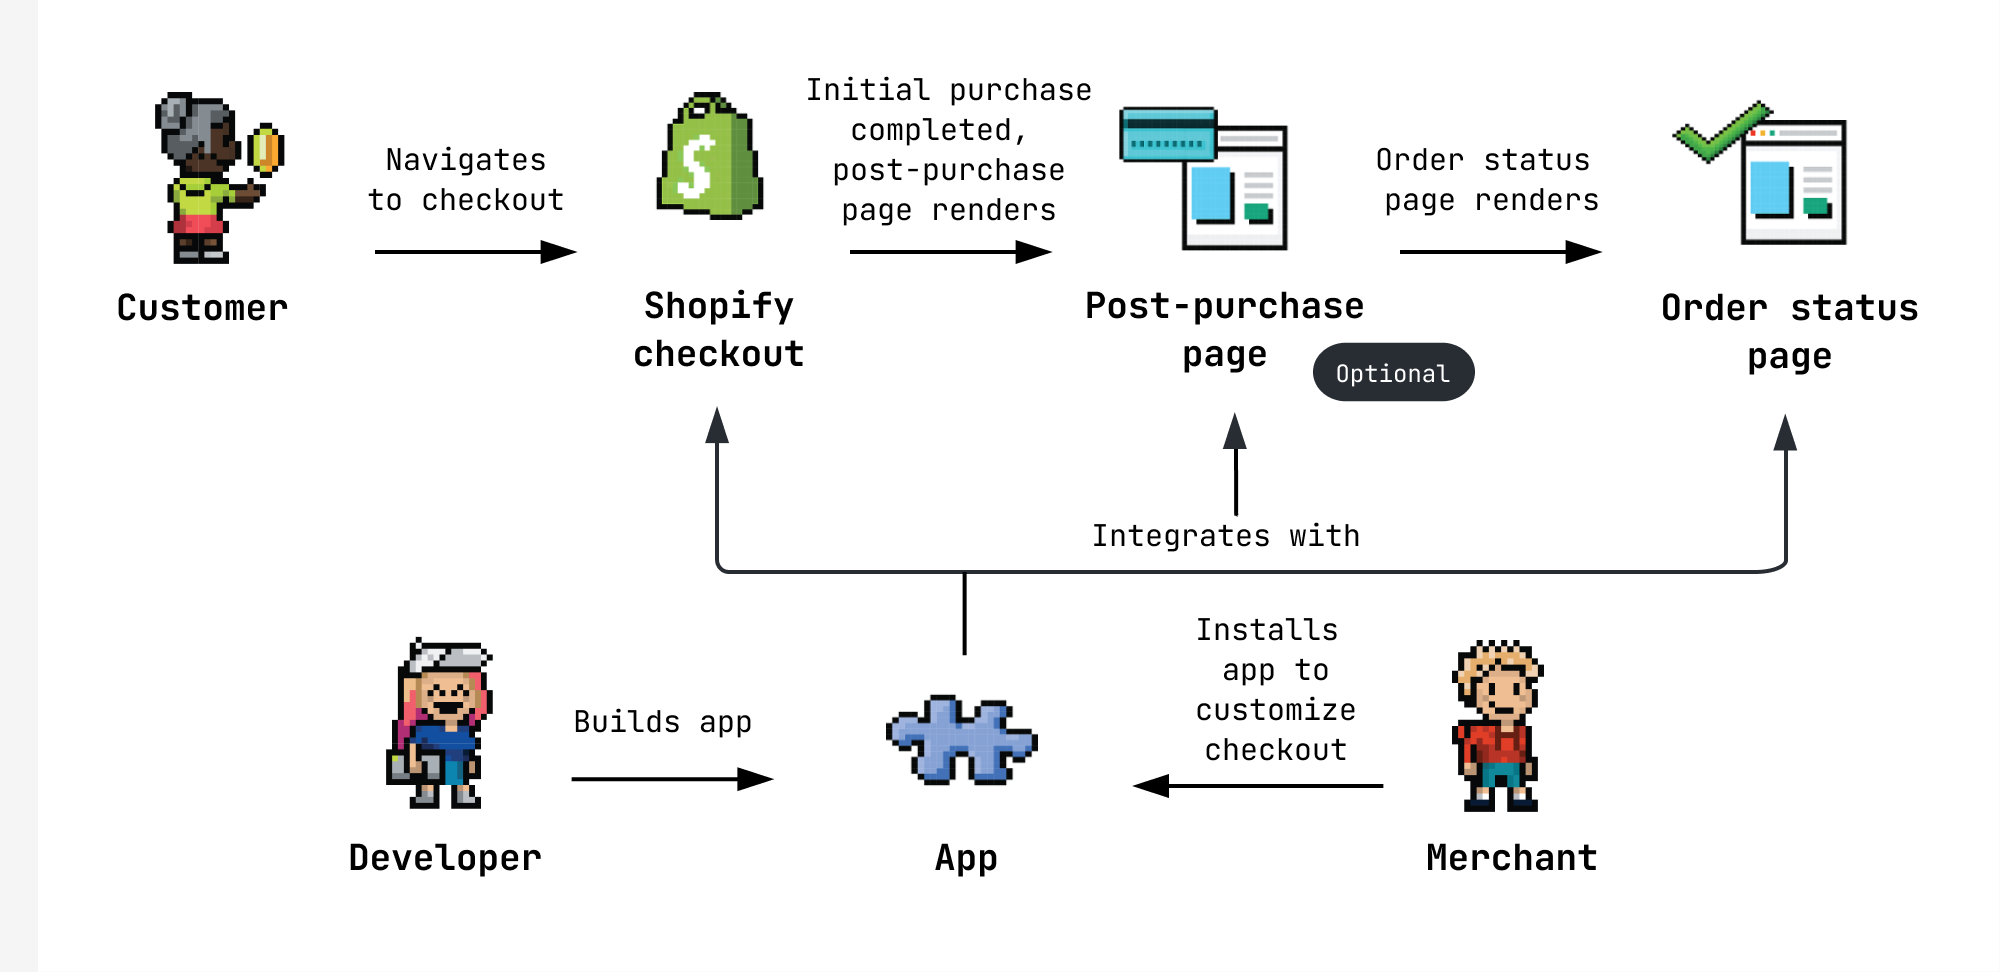 Actions that a developer, customer, and merchant take in connection to Shopify checkout